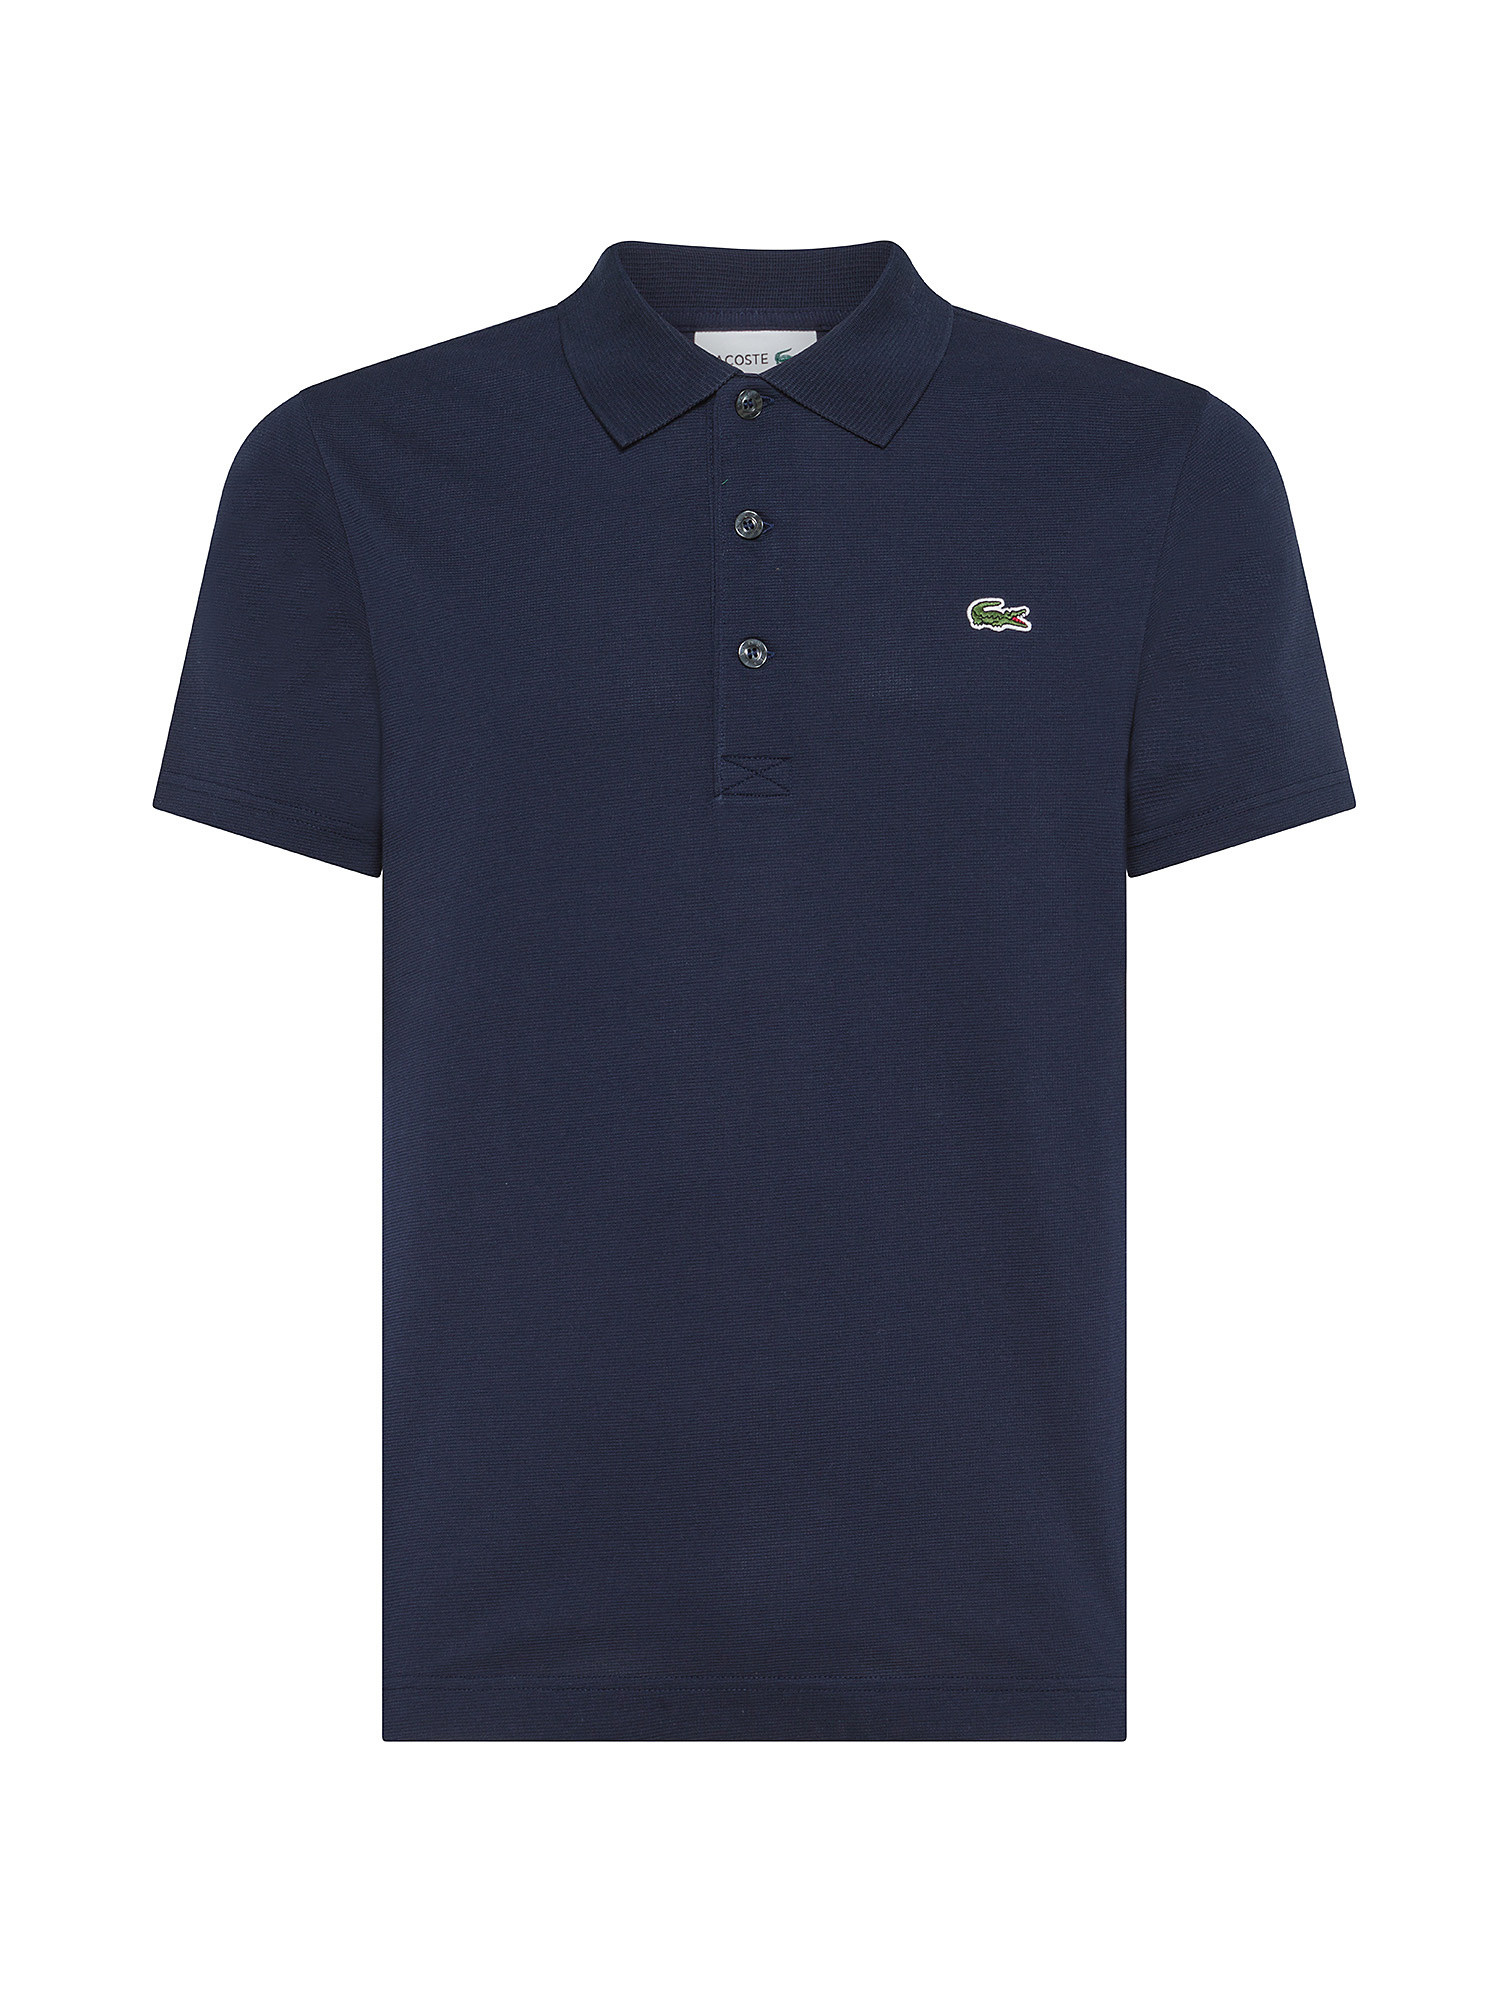 Lacoste - Regular fit stretch polo, Dark Blue, large image number 0